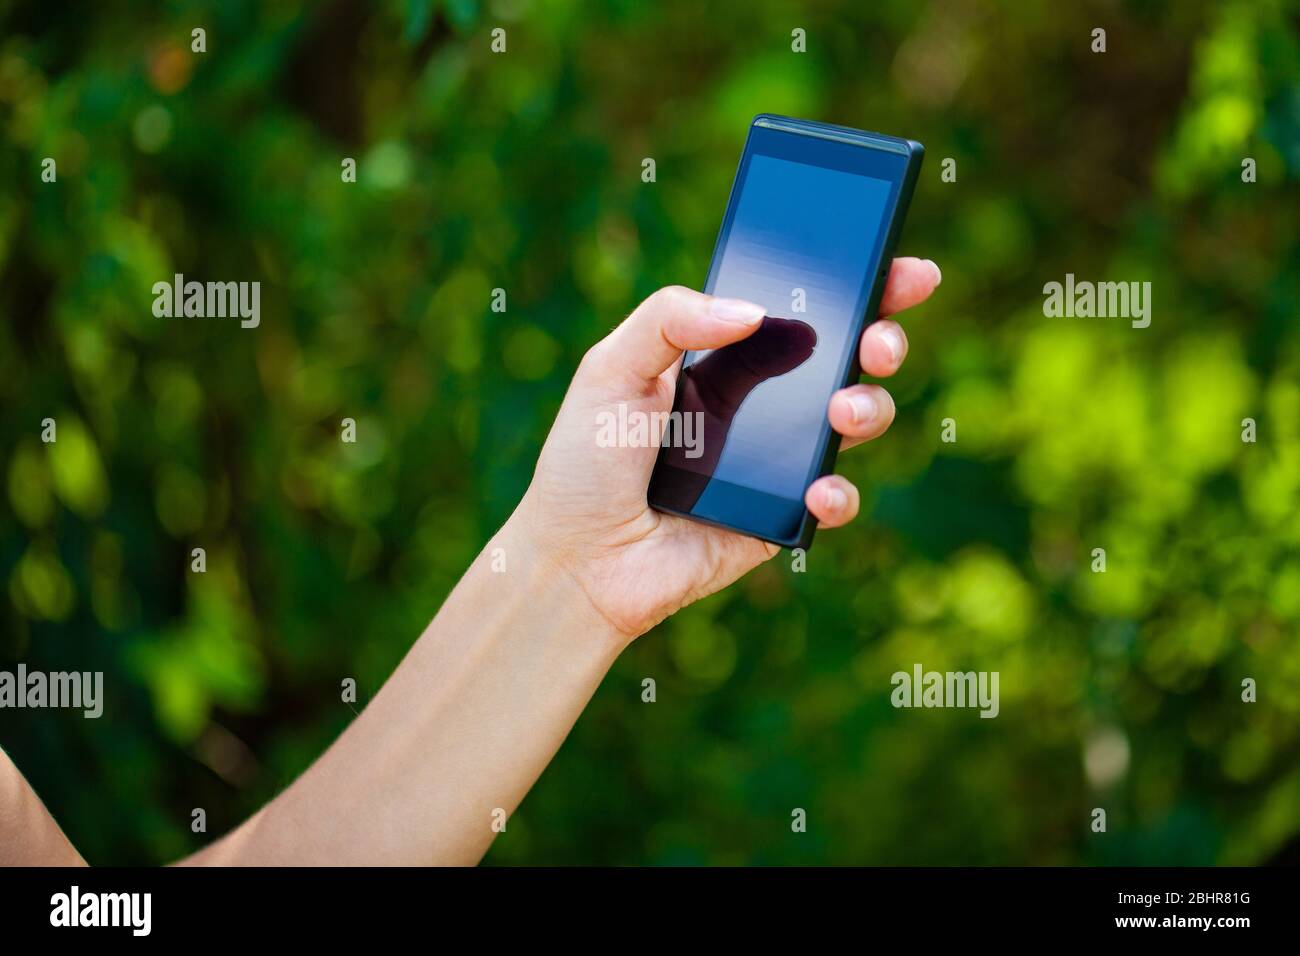 Side view of a woman's hand holding a modern slick smartphone while dialing with her thumb against summer green background Stock Photo